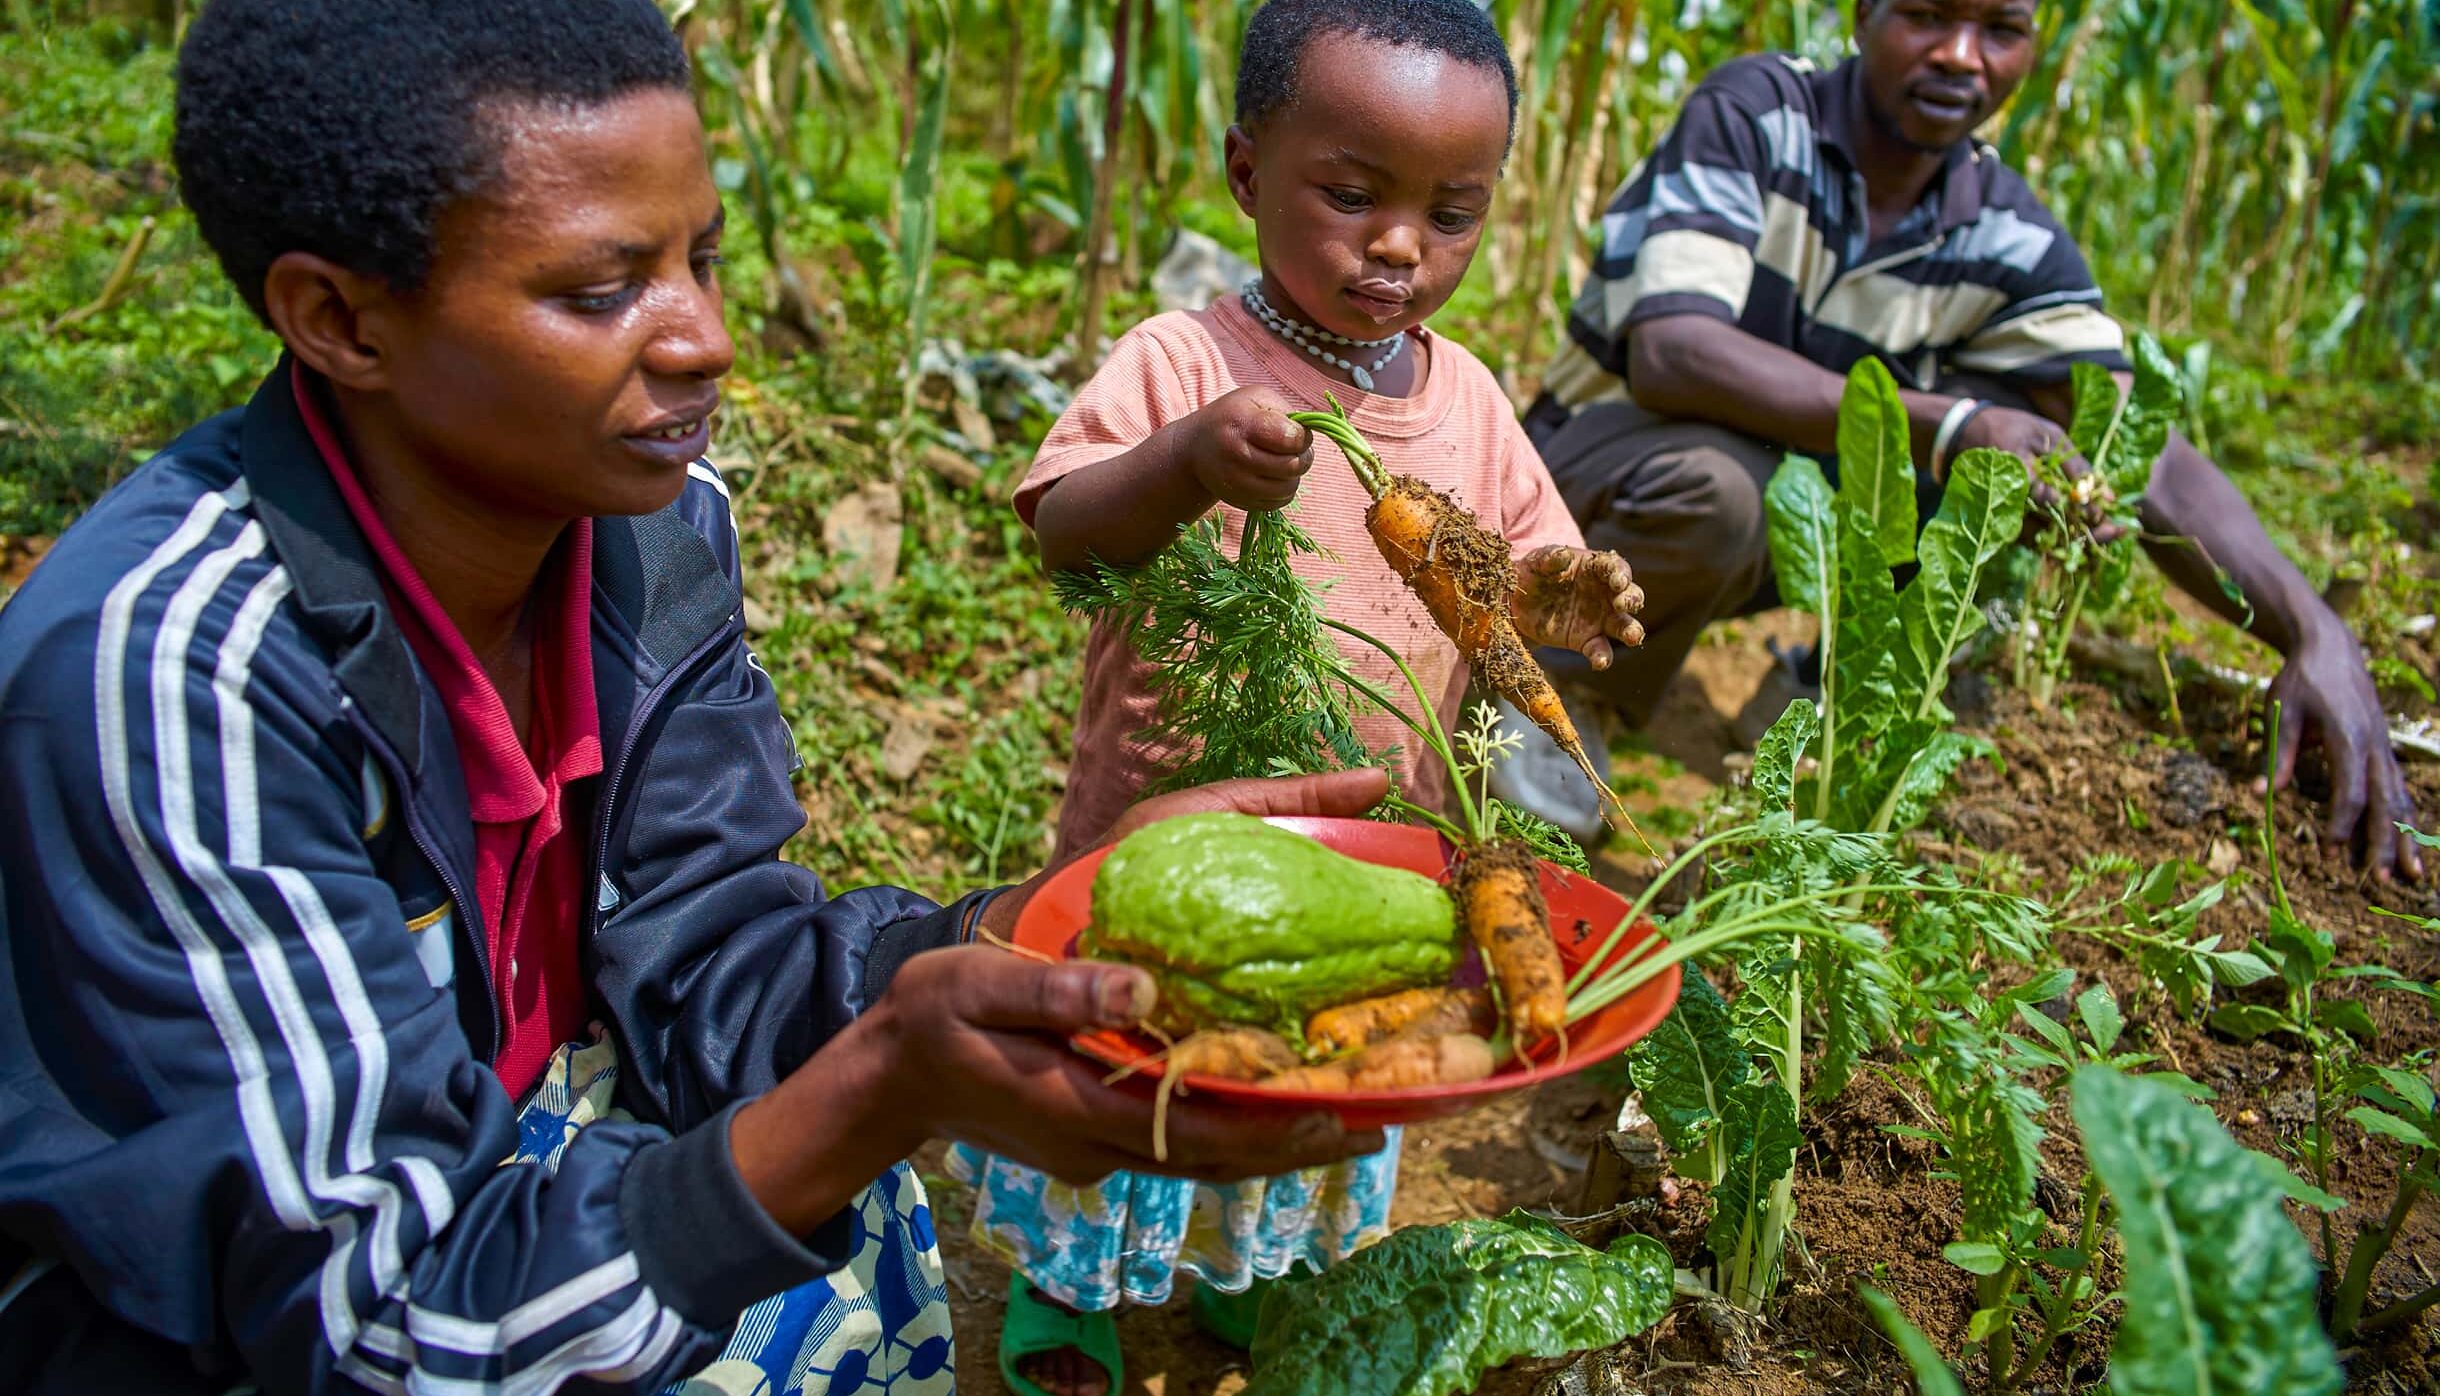 The State of Food Security and Nutrition in the World 2021 - UNICEF DATA